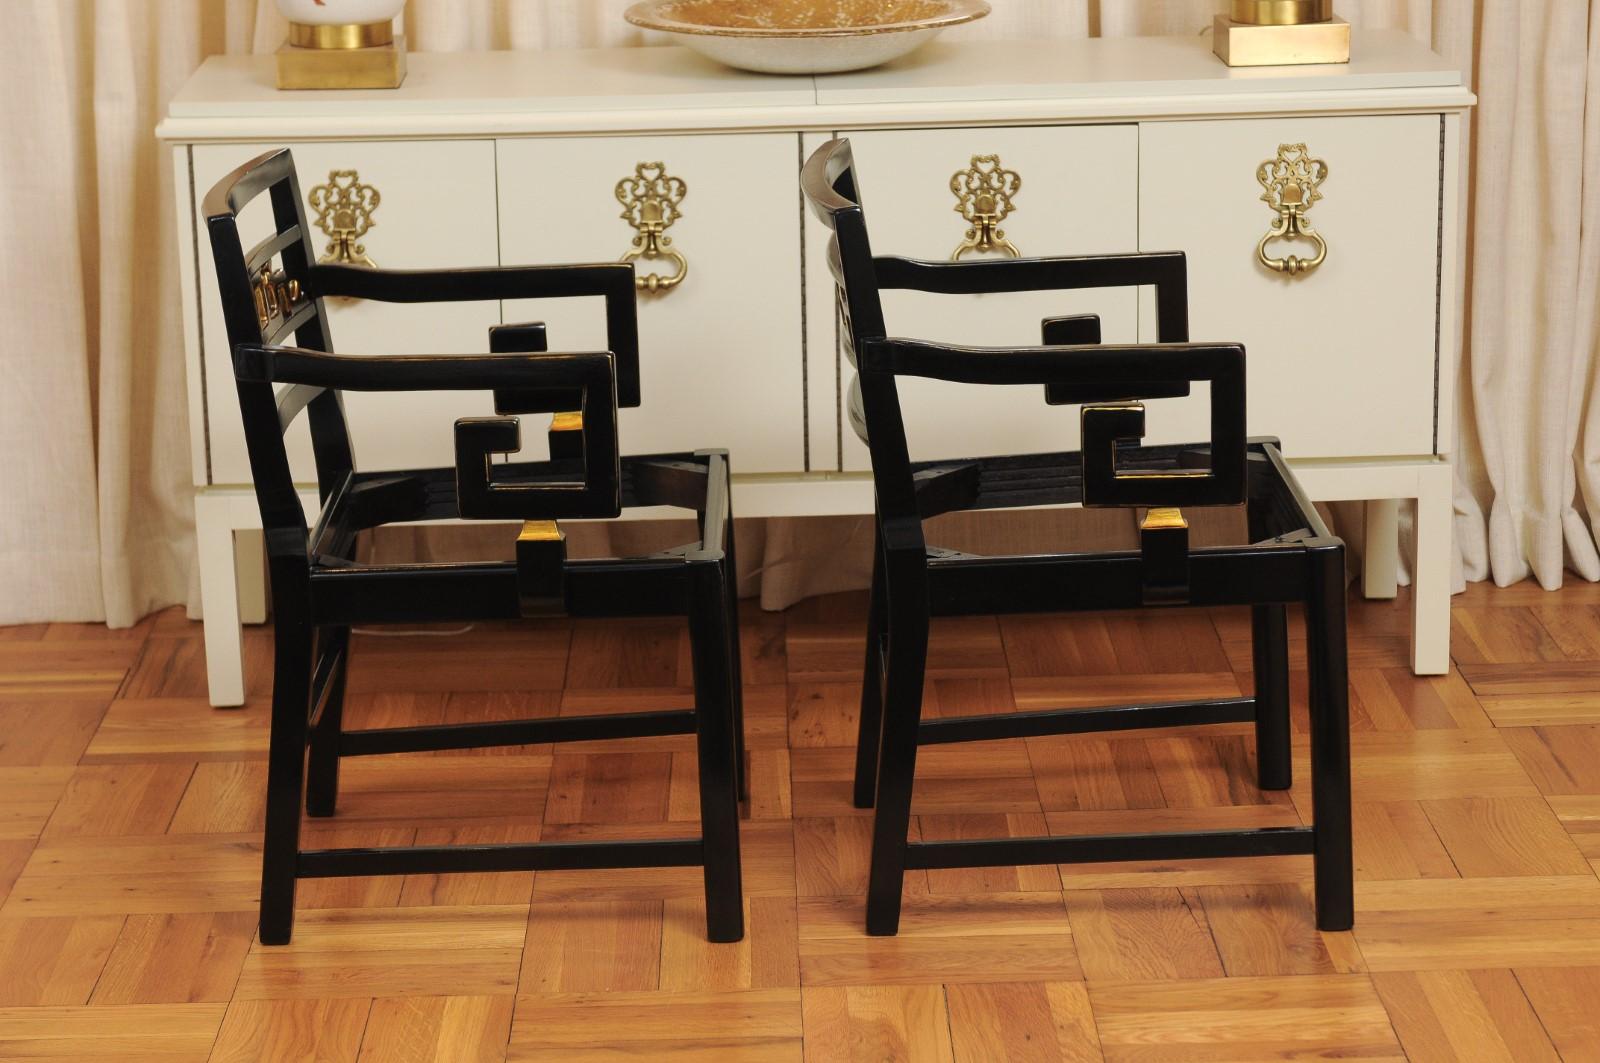 Mahogany Exquisite Pair of Modern Chinoiserie Greek Key Armchairs by Baker, circa 1960